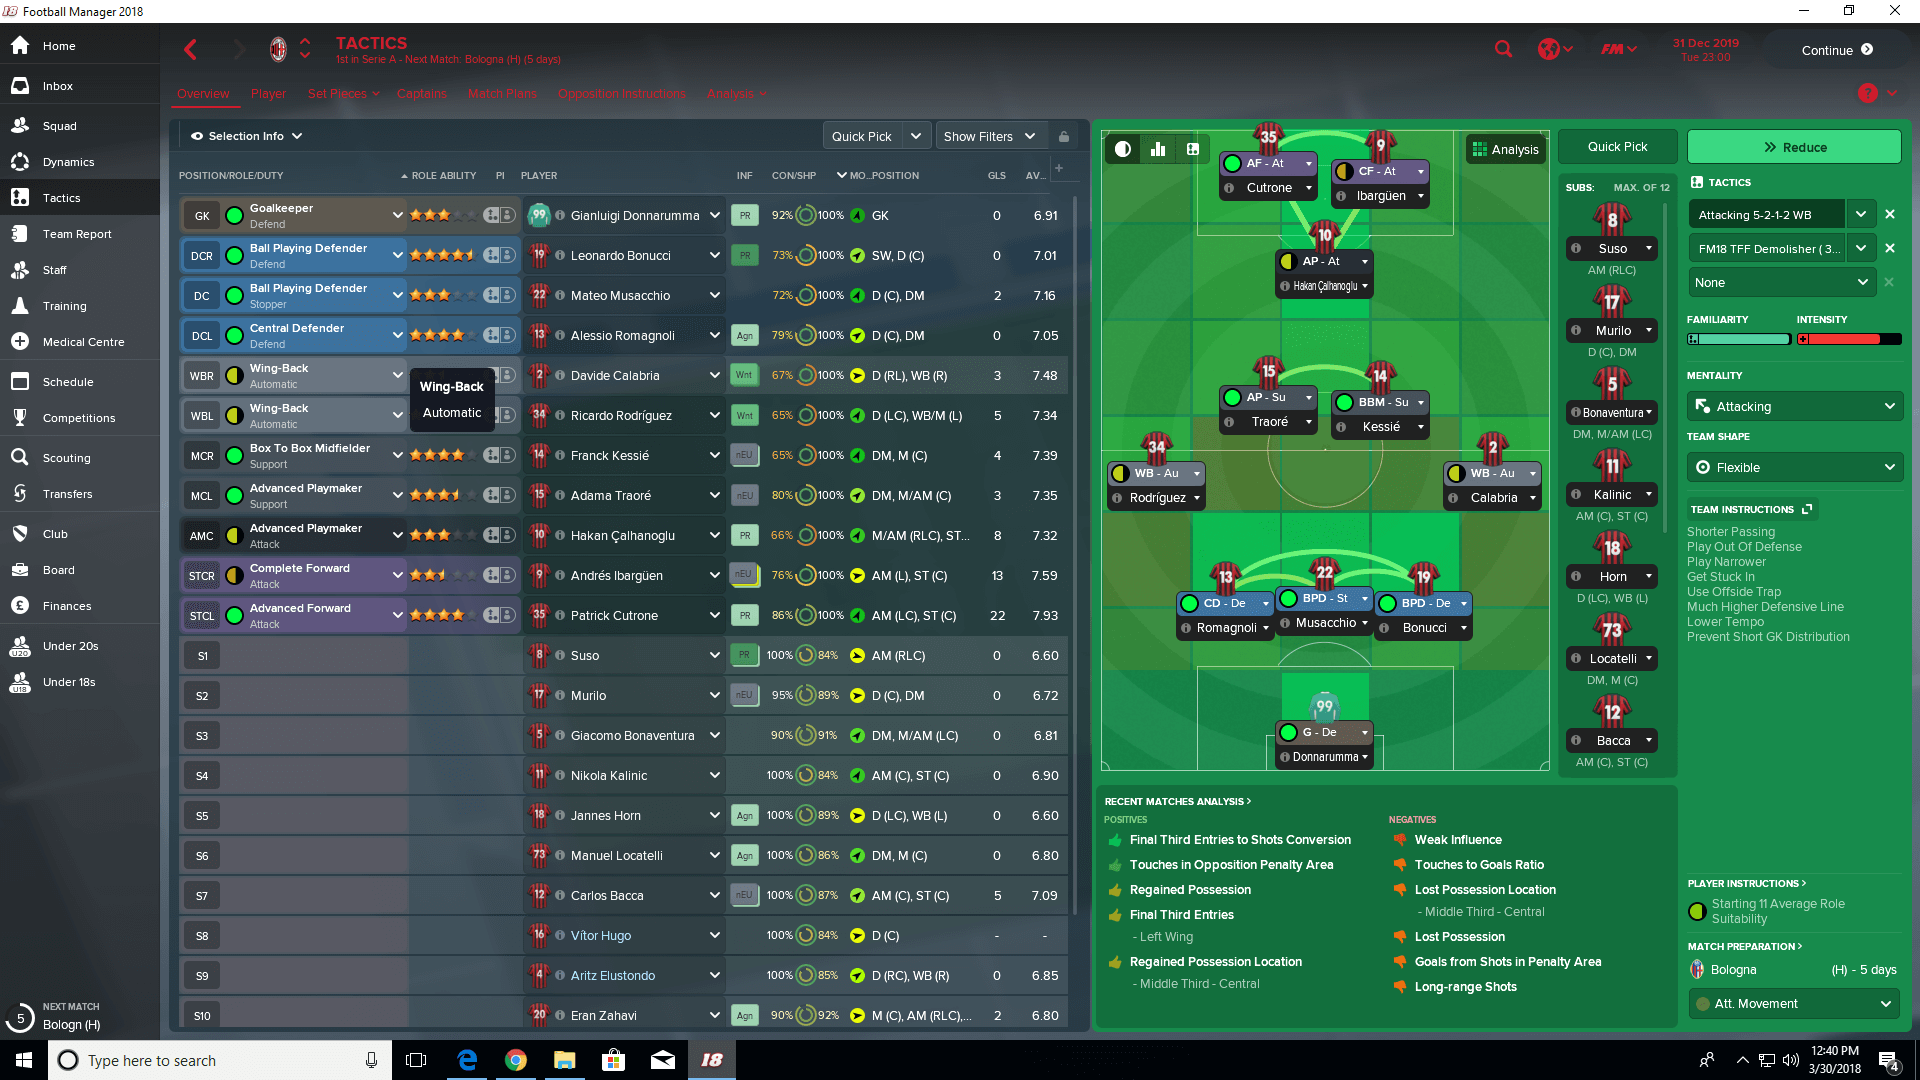 Please rate my tactics, I'm very new to the game. : r/footballmanagergames